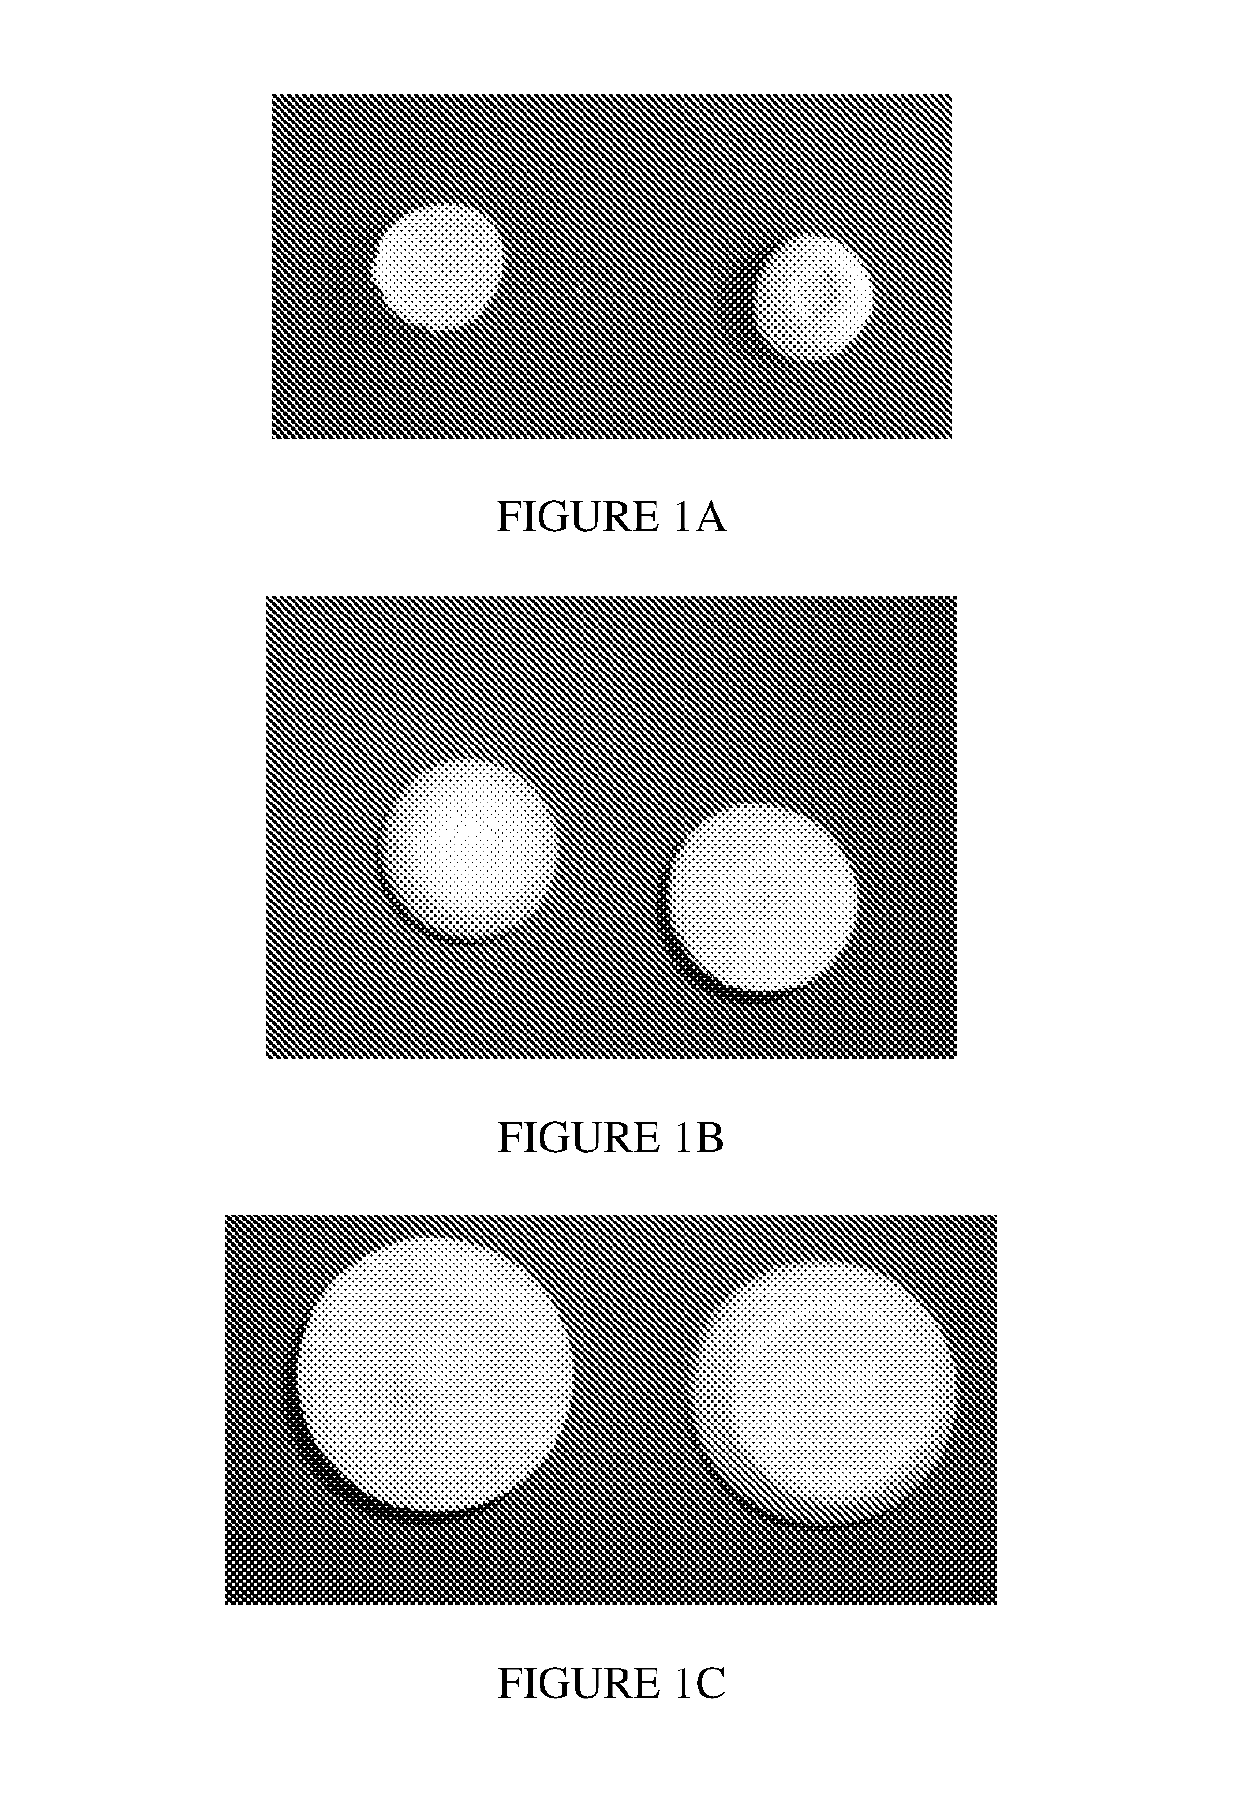 Lyophilized pharmaceutical compositions for vaginal delivery